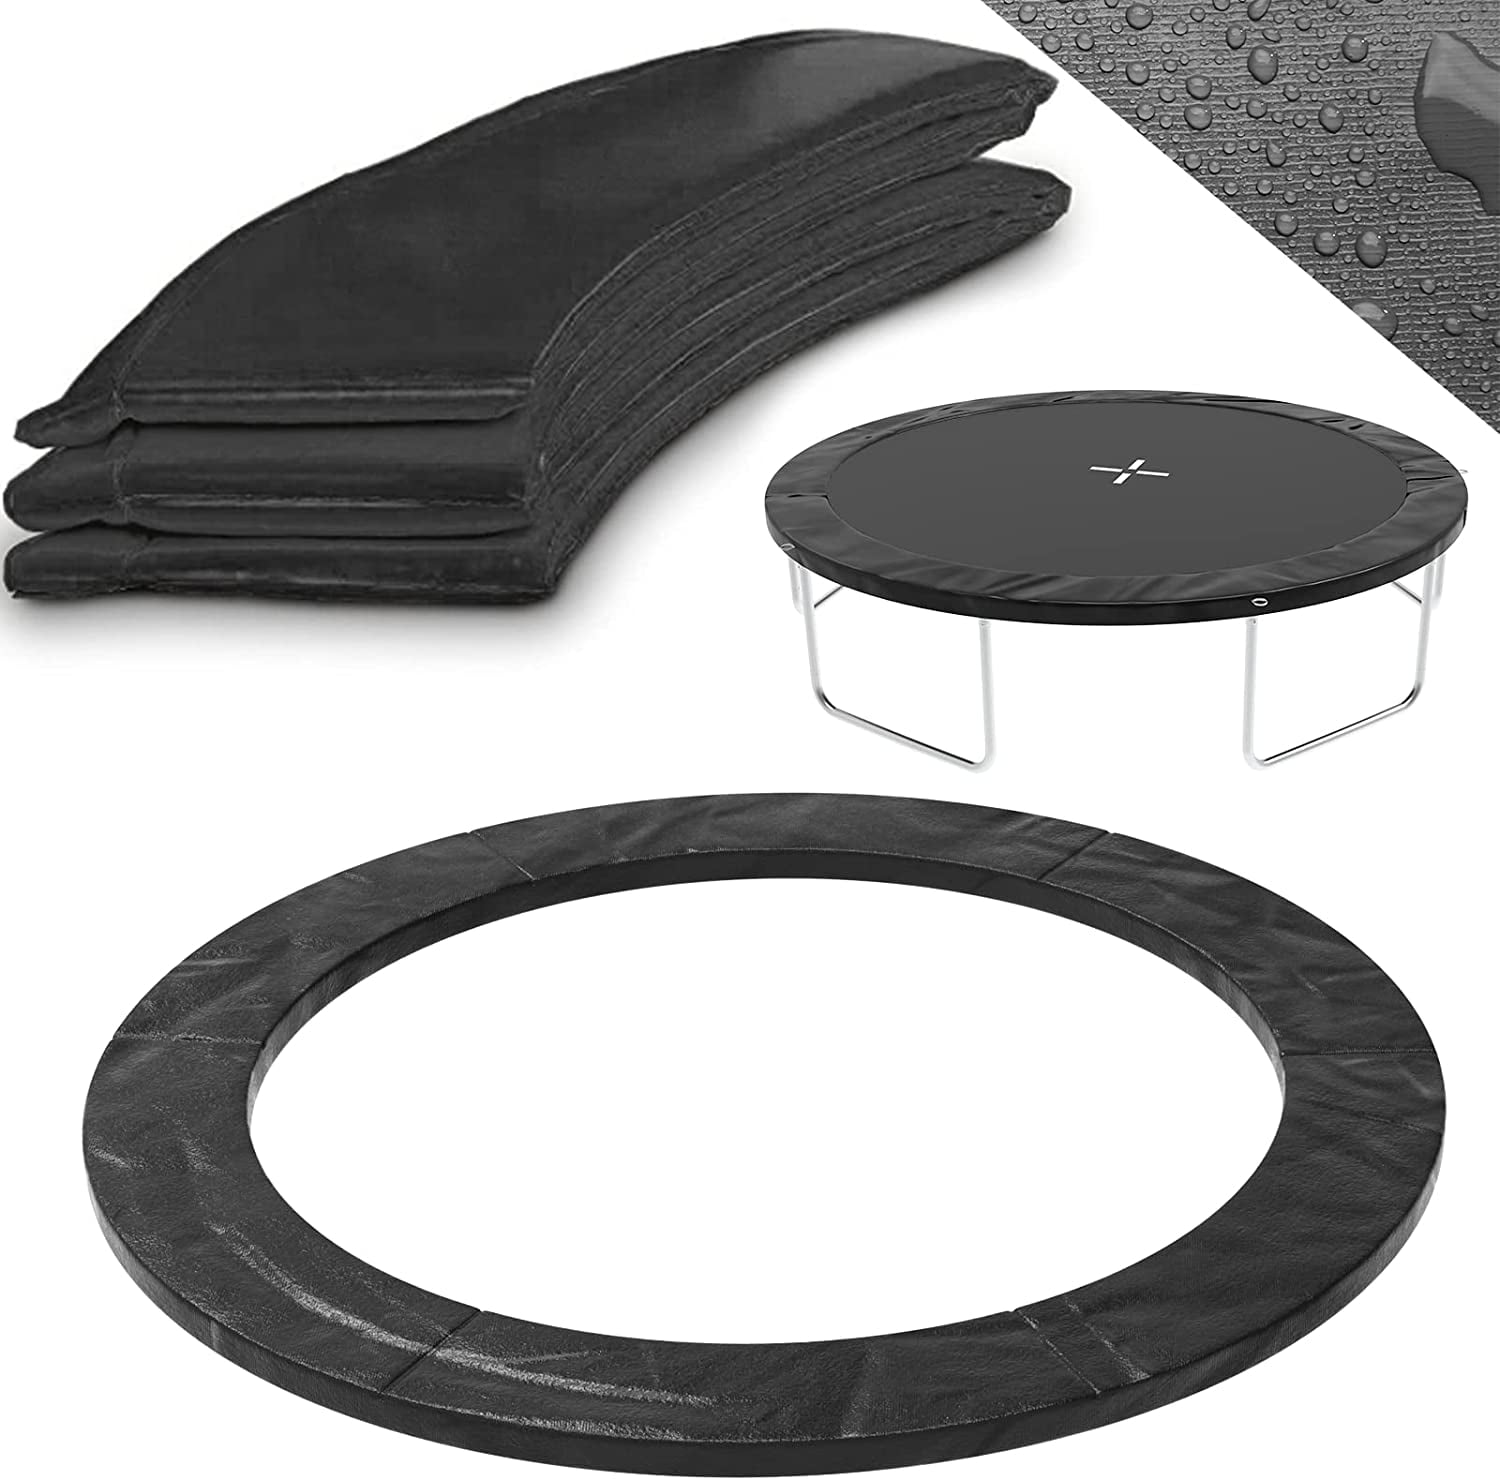 4PCS Trampoline Patch Repair Kit 5 x 5 inch Square On Patches  Repair  Holes or tears in a Trampoline Mat, Black - Yahoo Shopping